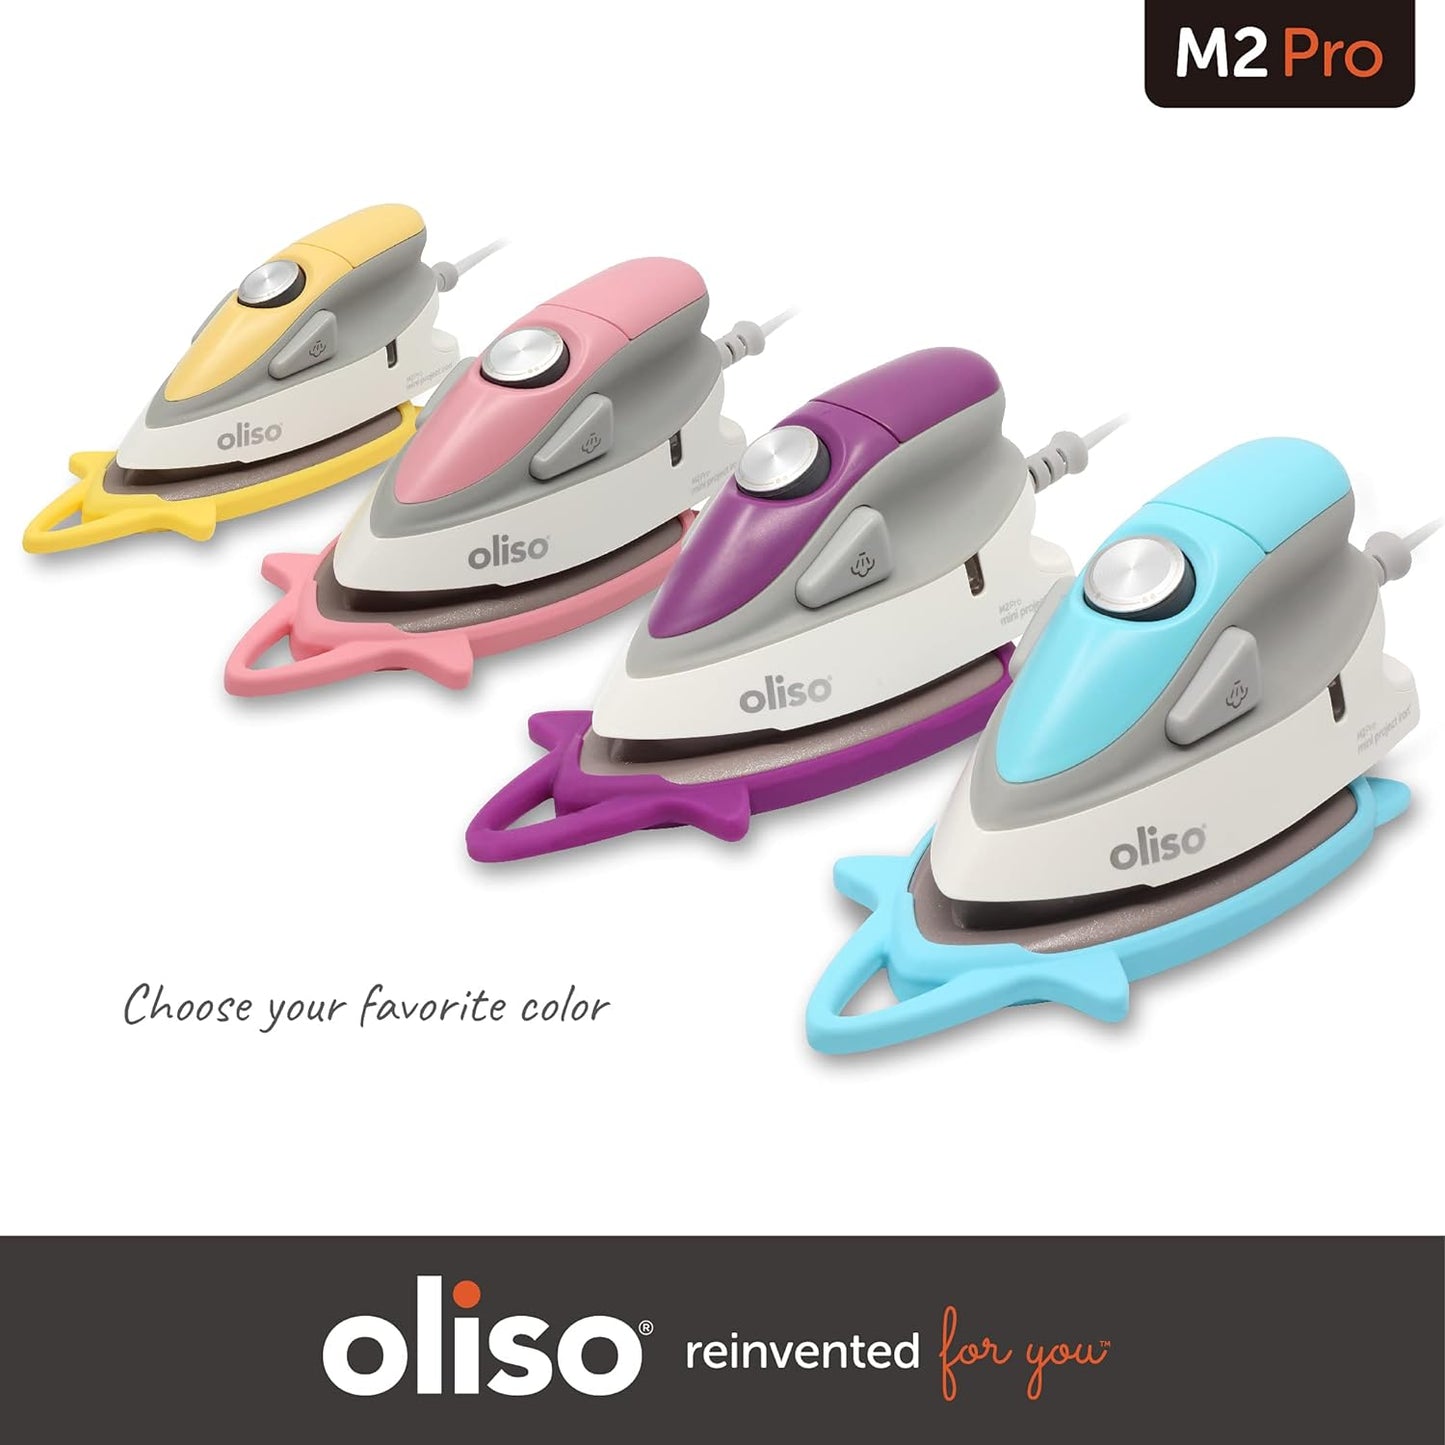 Product ImageProduct ImageProduct ImageProduct Image  OLISO M3Pro Project Iron - Teal